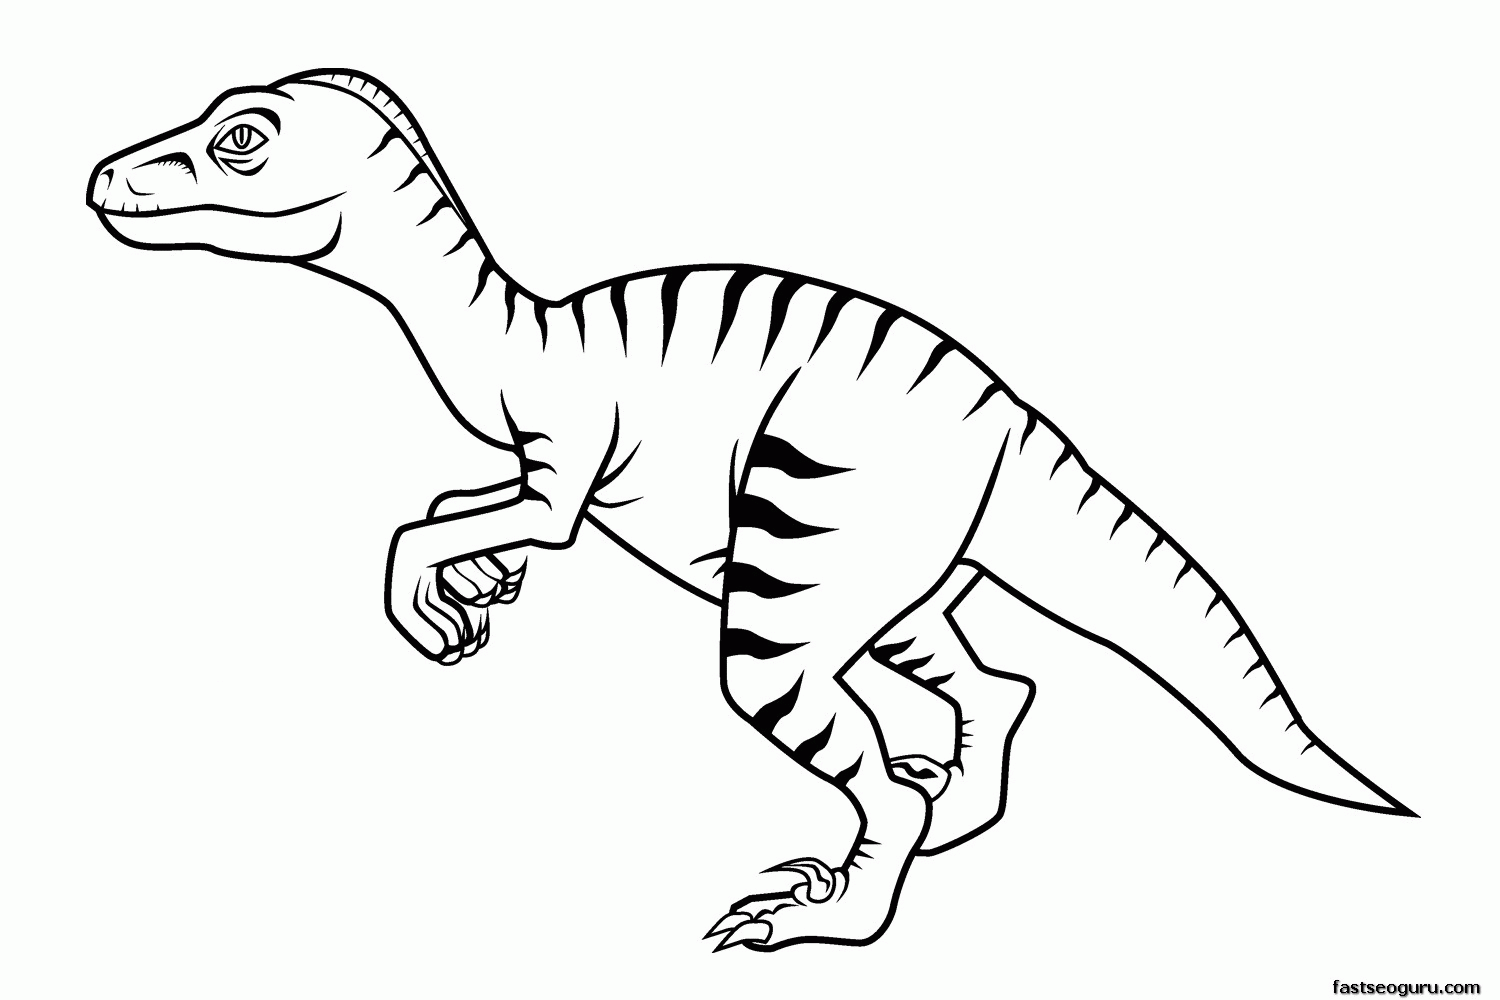 types-of-dinosaurs-coloring-pages